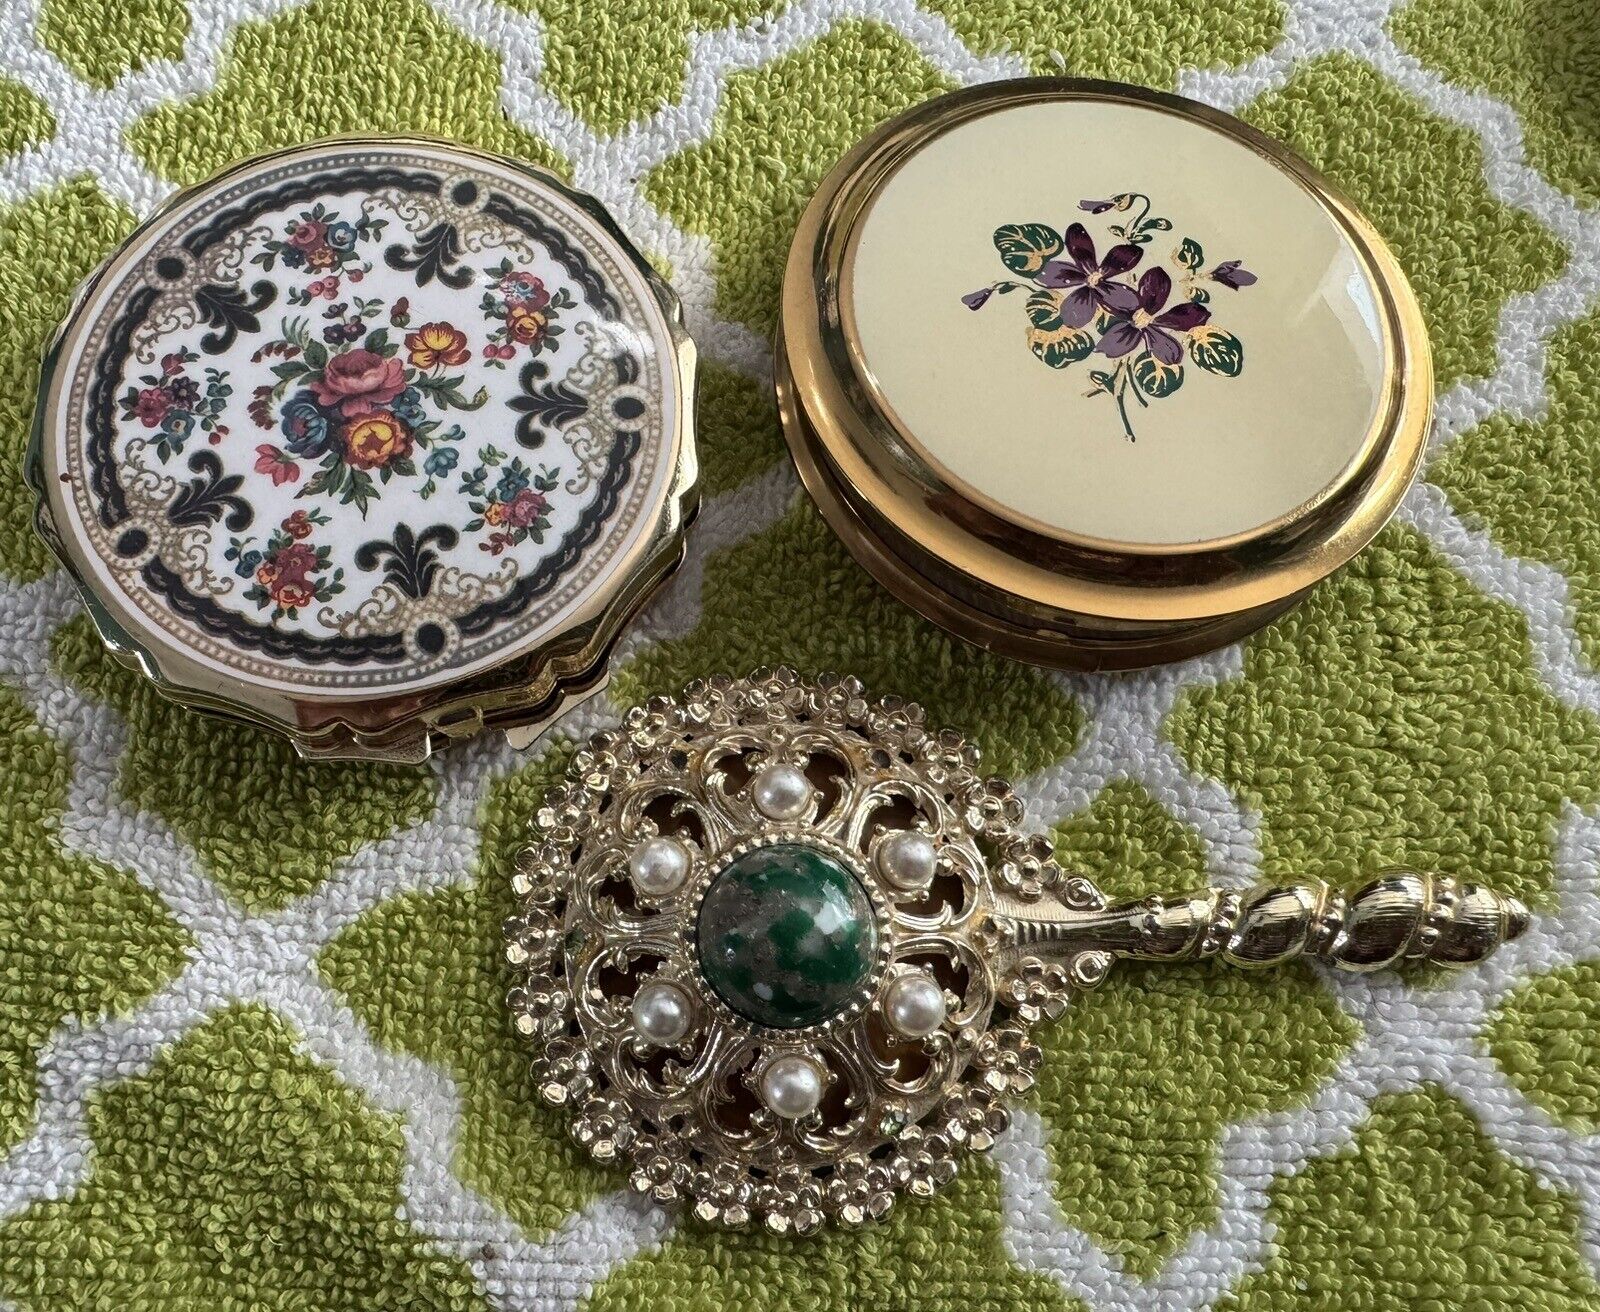 Vintage Vanity Items 2 Compacts New & Small Jeweled Mirror Lovely Collection